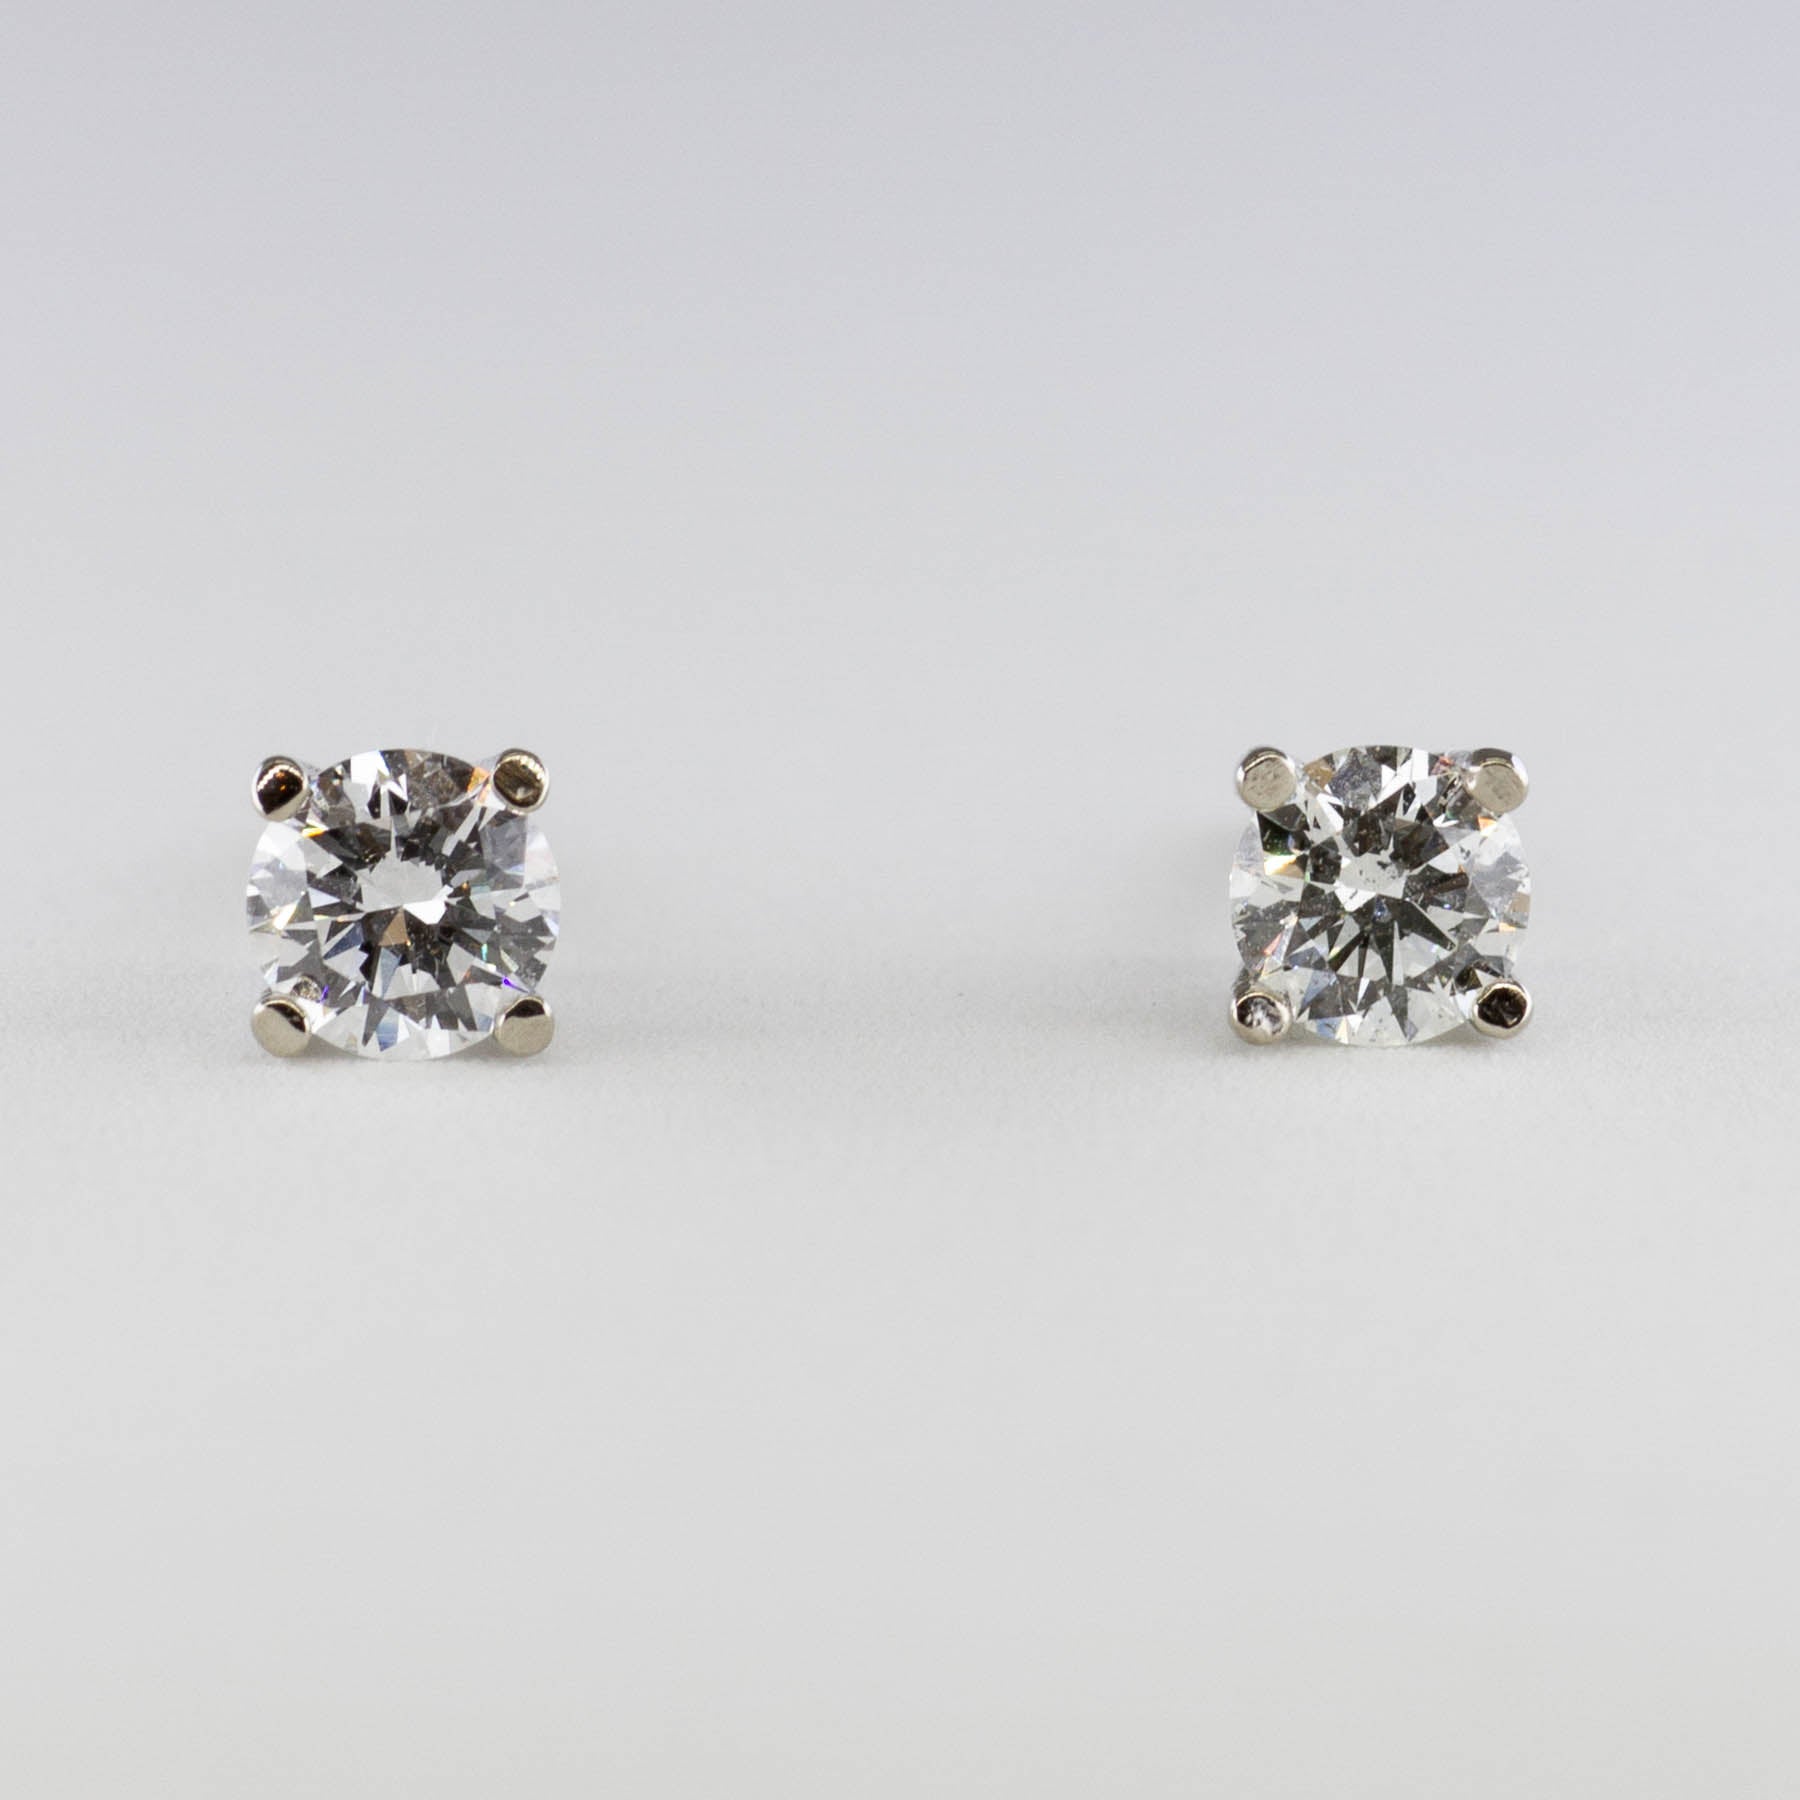 '100 Ways' White Gold Diamond Studs | 1/2 carat | H Colour, Clarity Options Available | - 100 Ways